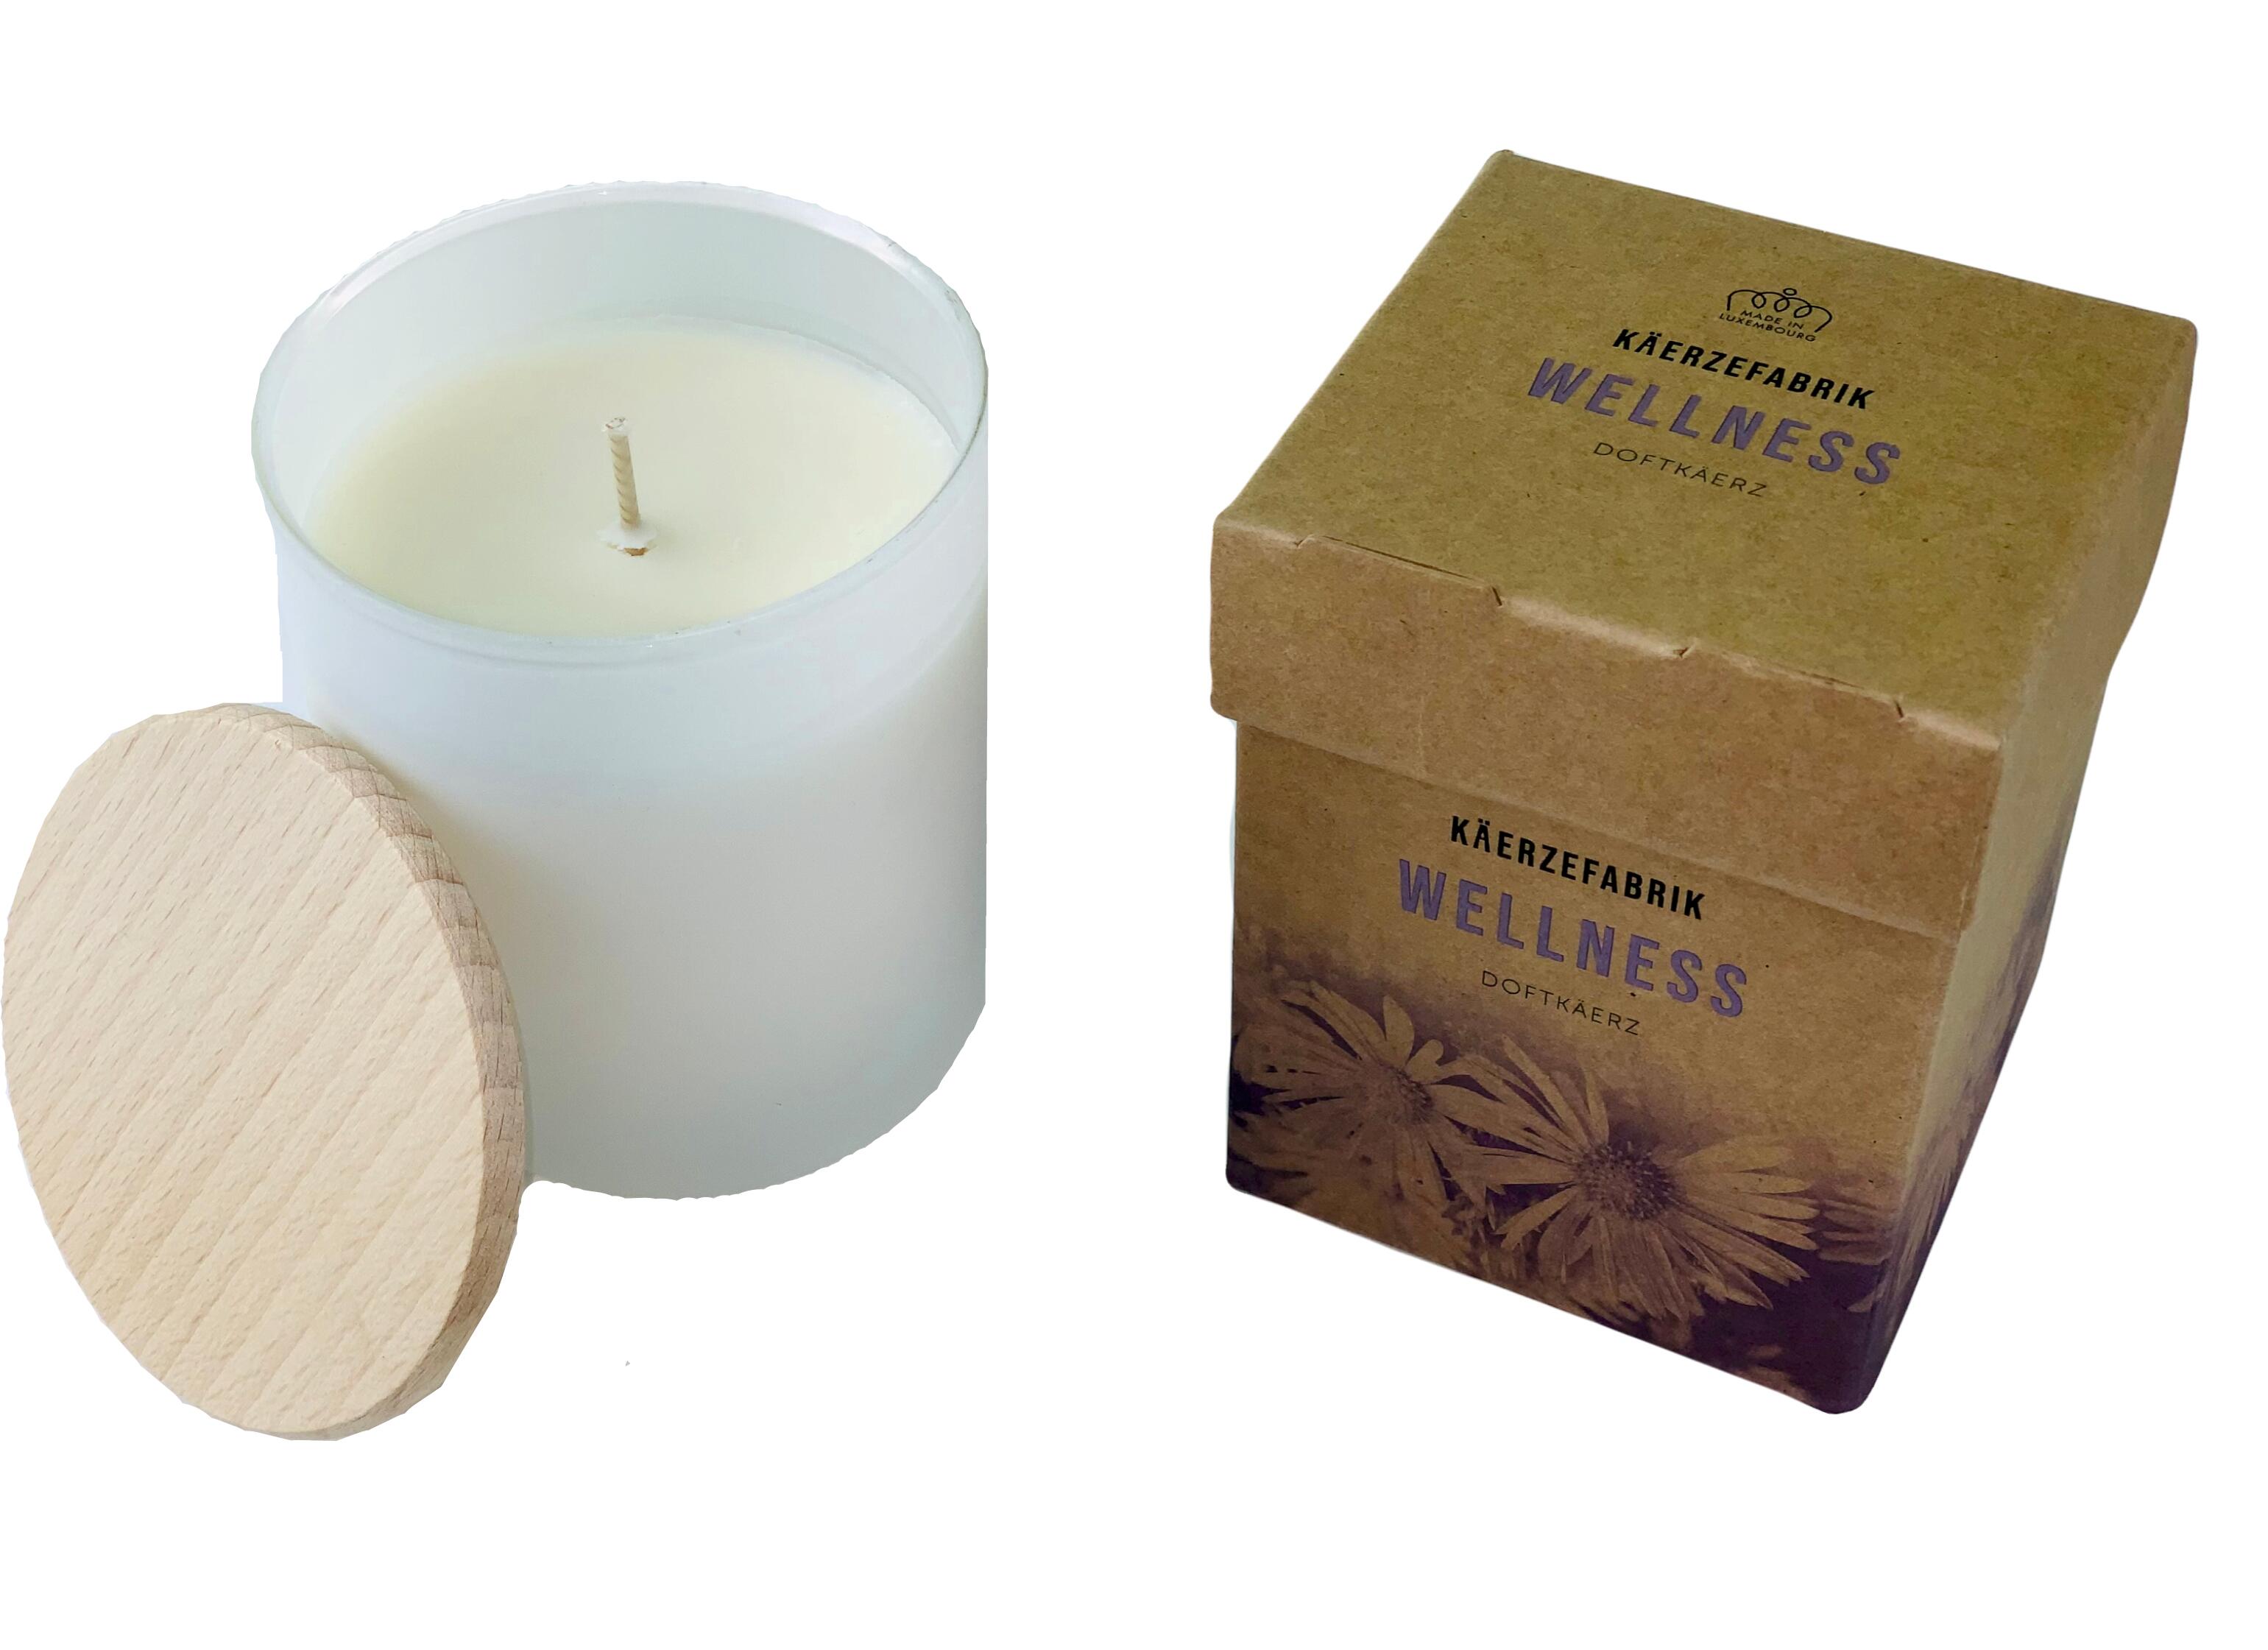 Scented candle "Wellness